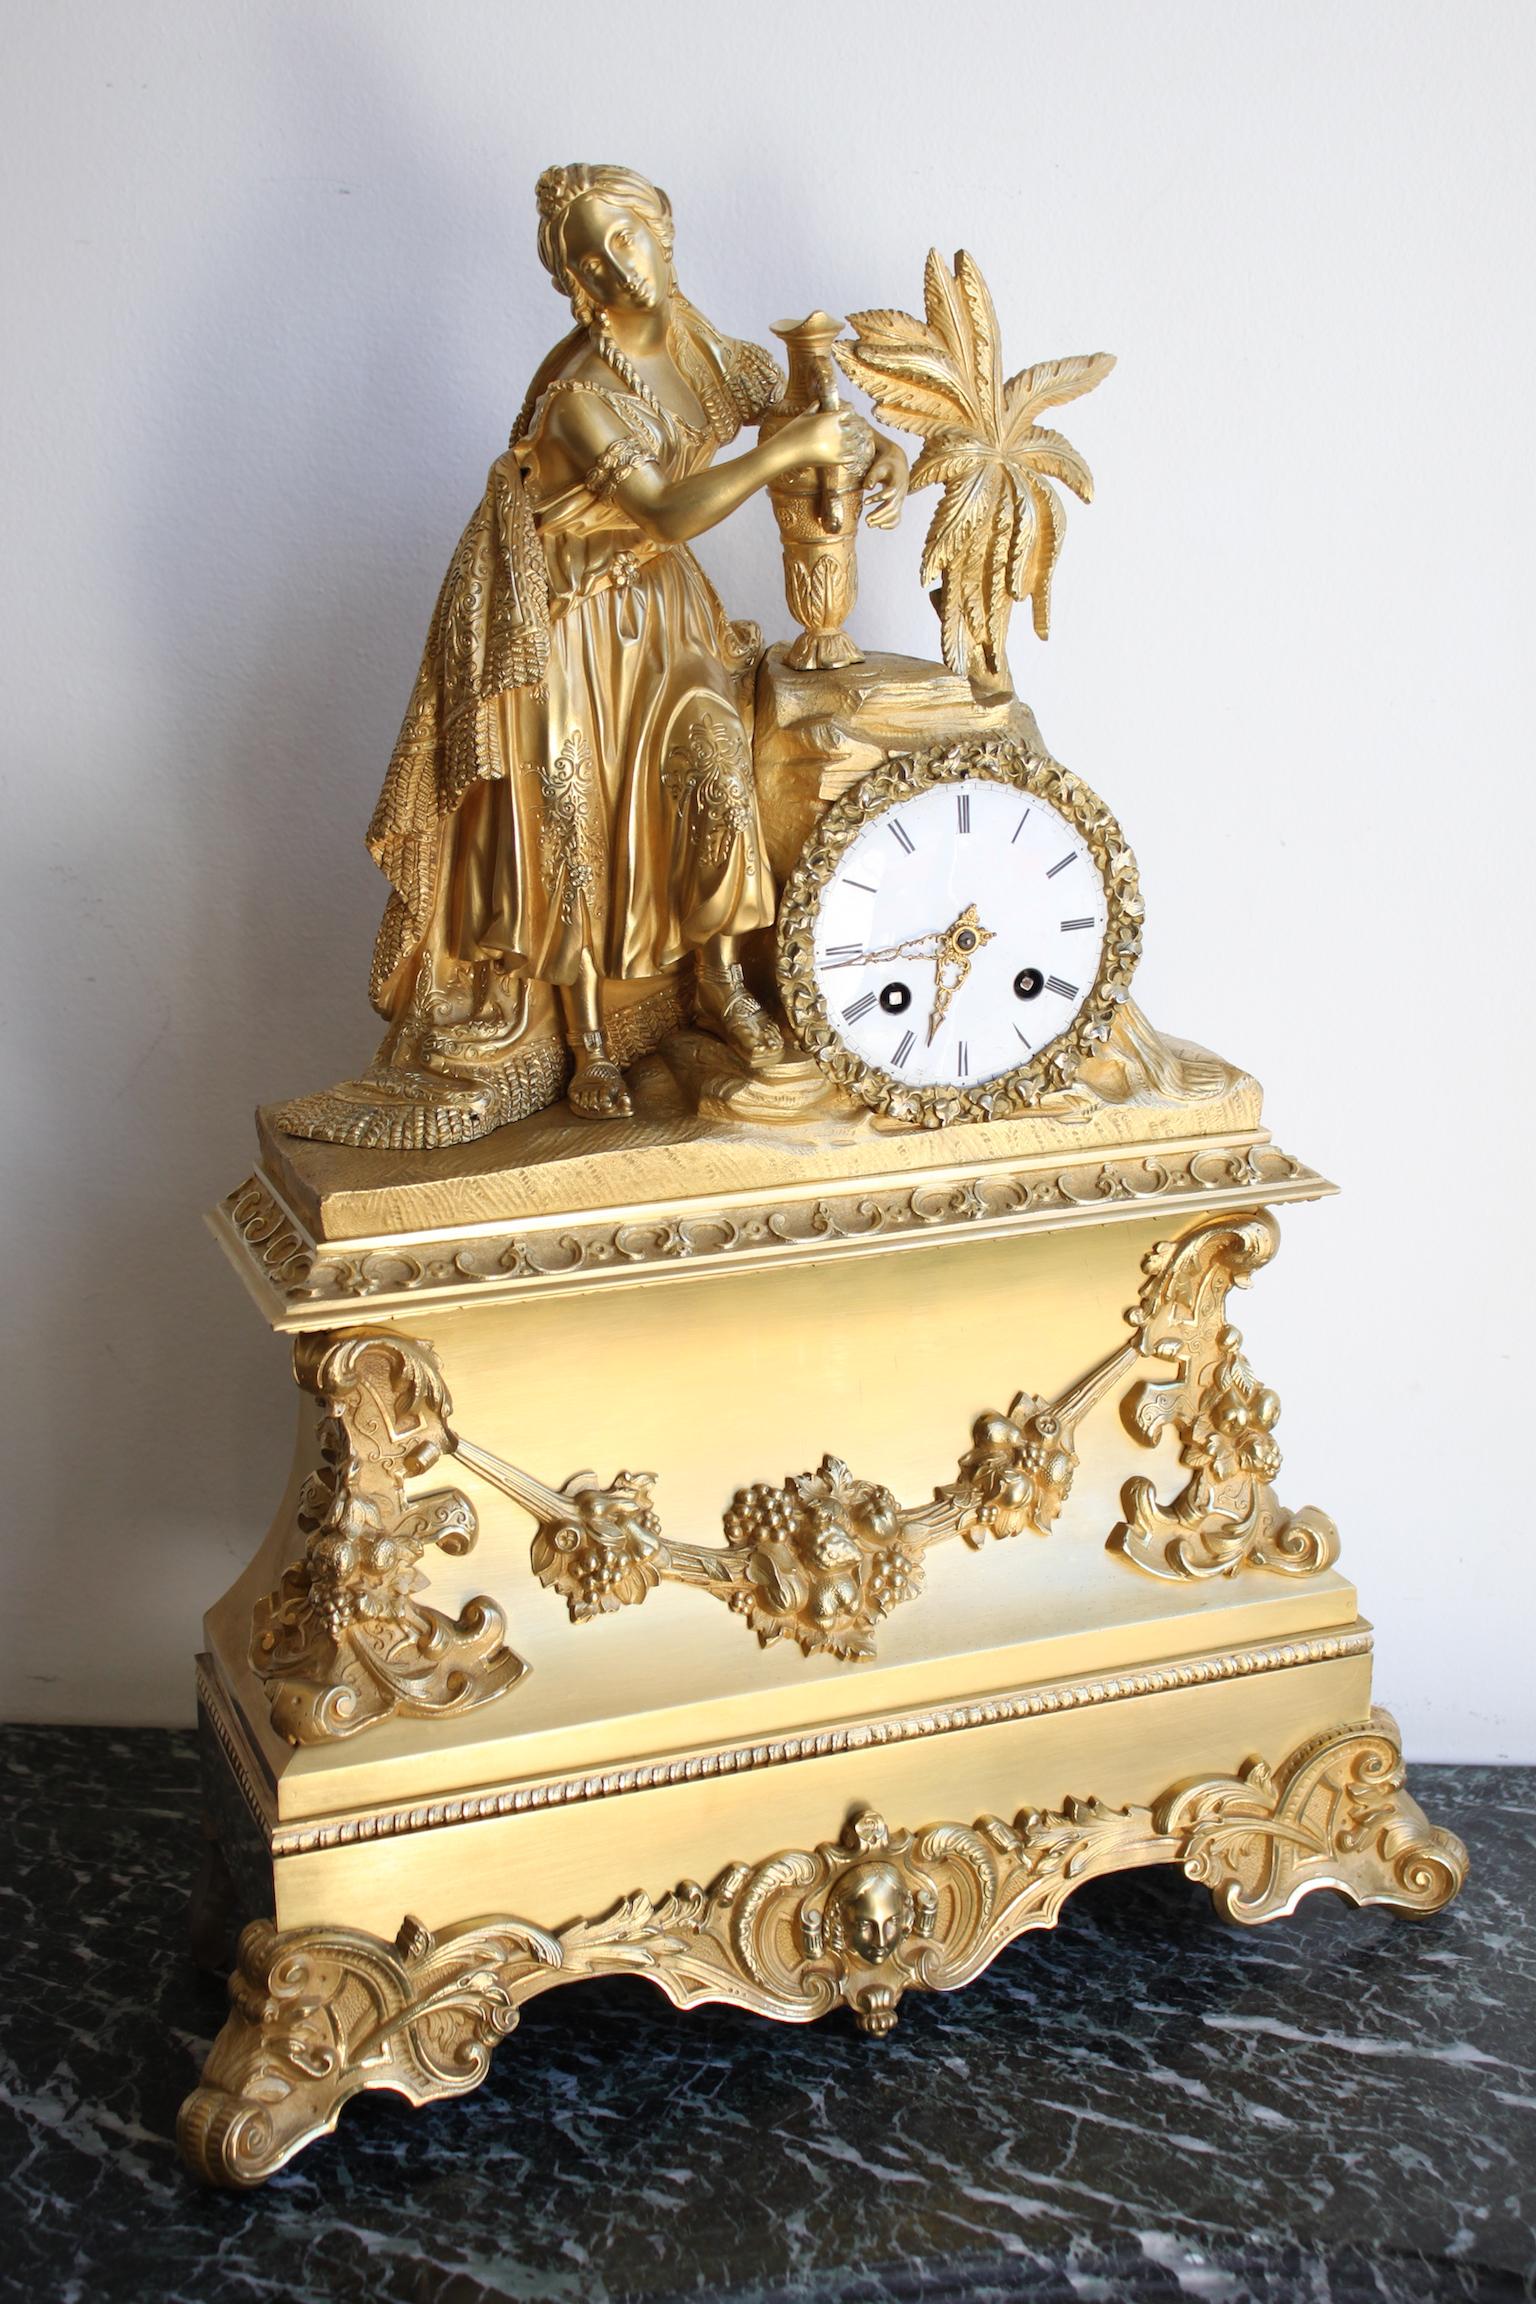 Charles X Oriental clock representing a woman with a jug, Charles X. In working order.
Dimensions: width 37cm, depth 12cm, height 48.5cm.